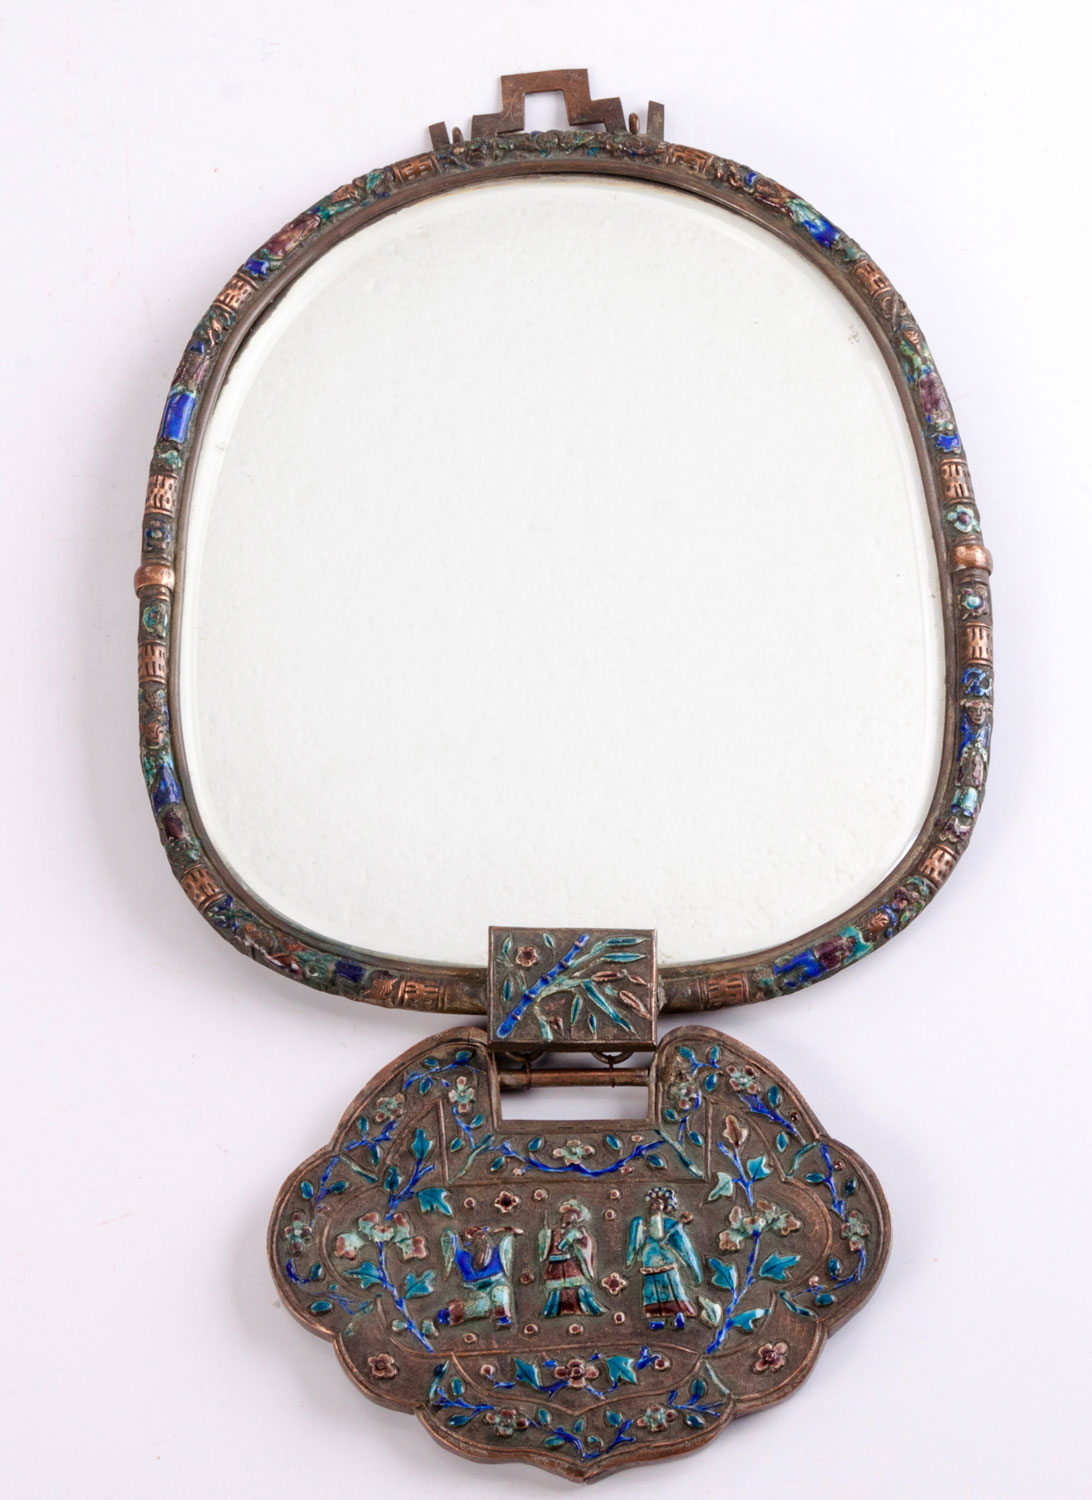 A CHINESE SILVERED COPPER AND ENAMEL ‘LOCK-CHARM’ MIRROR, LATE 19TH CENTURY